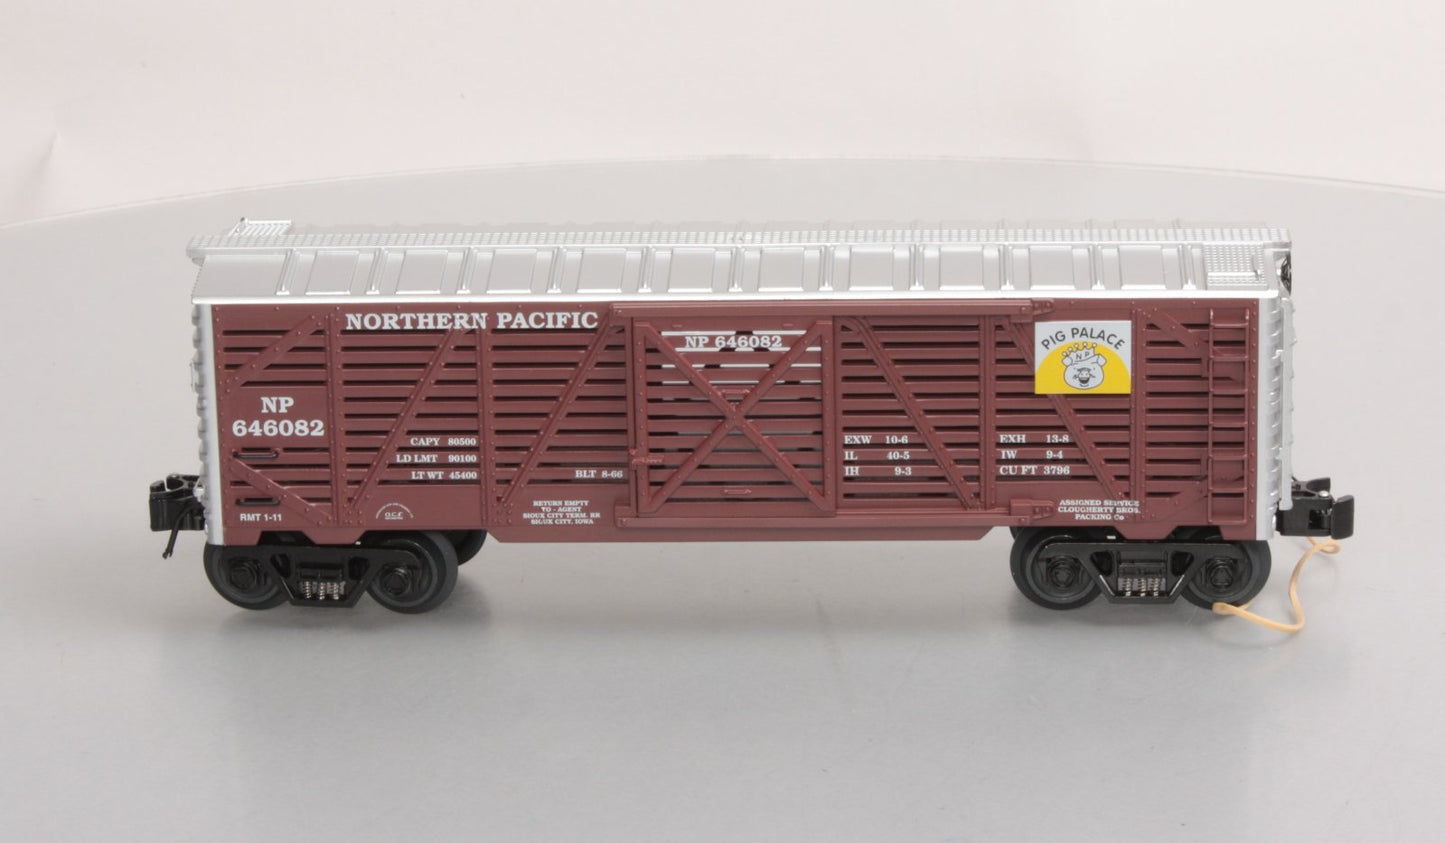 O-Line 119 Northern Pacific Stock Car #646082